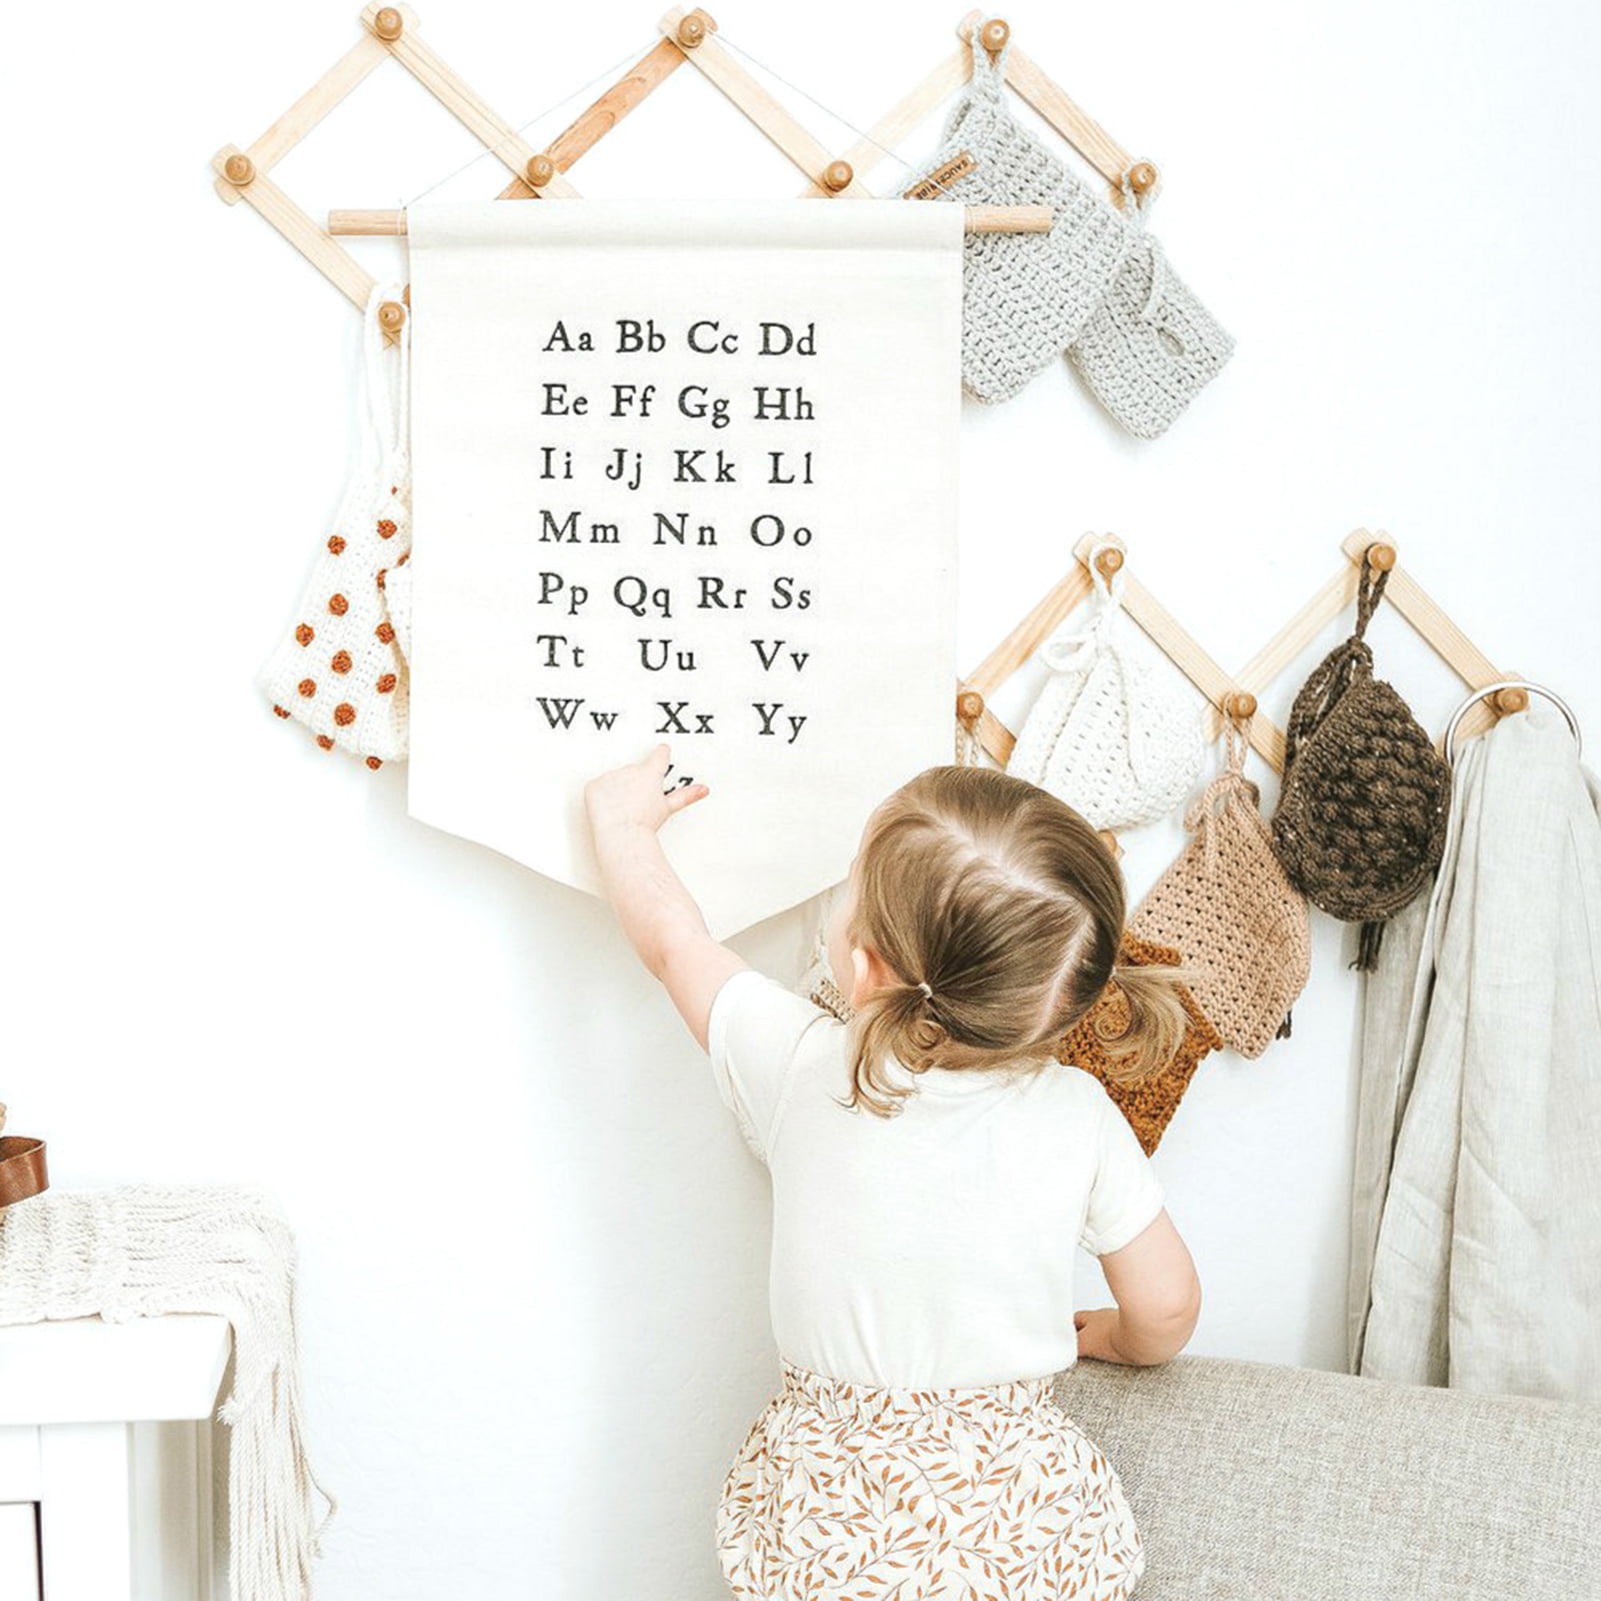 Nursery Wall Canvas Banners Home Decorative Plaque Letter Teen and Kids Room Cotton Alphabet Wall Hanging Decoration for Baby Girl Baby Boy 